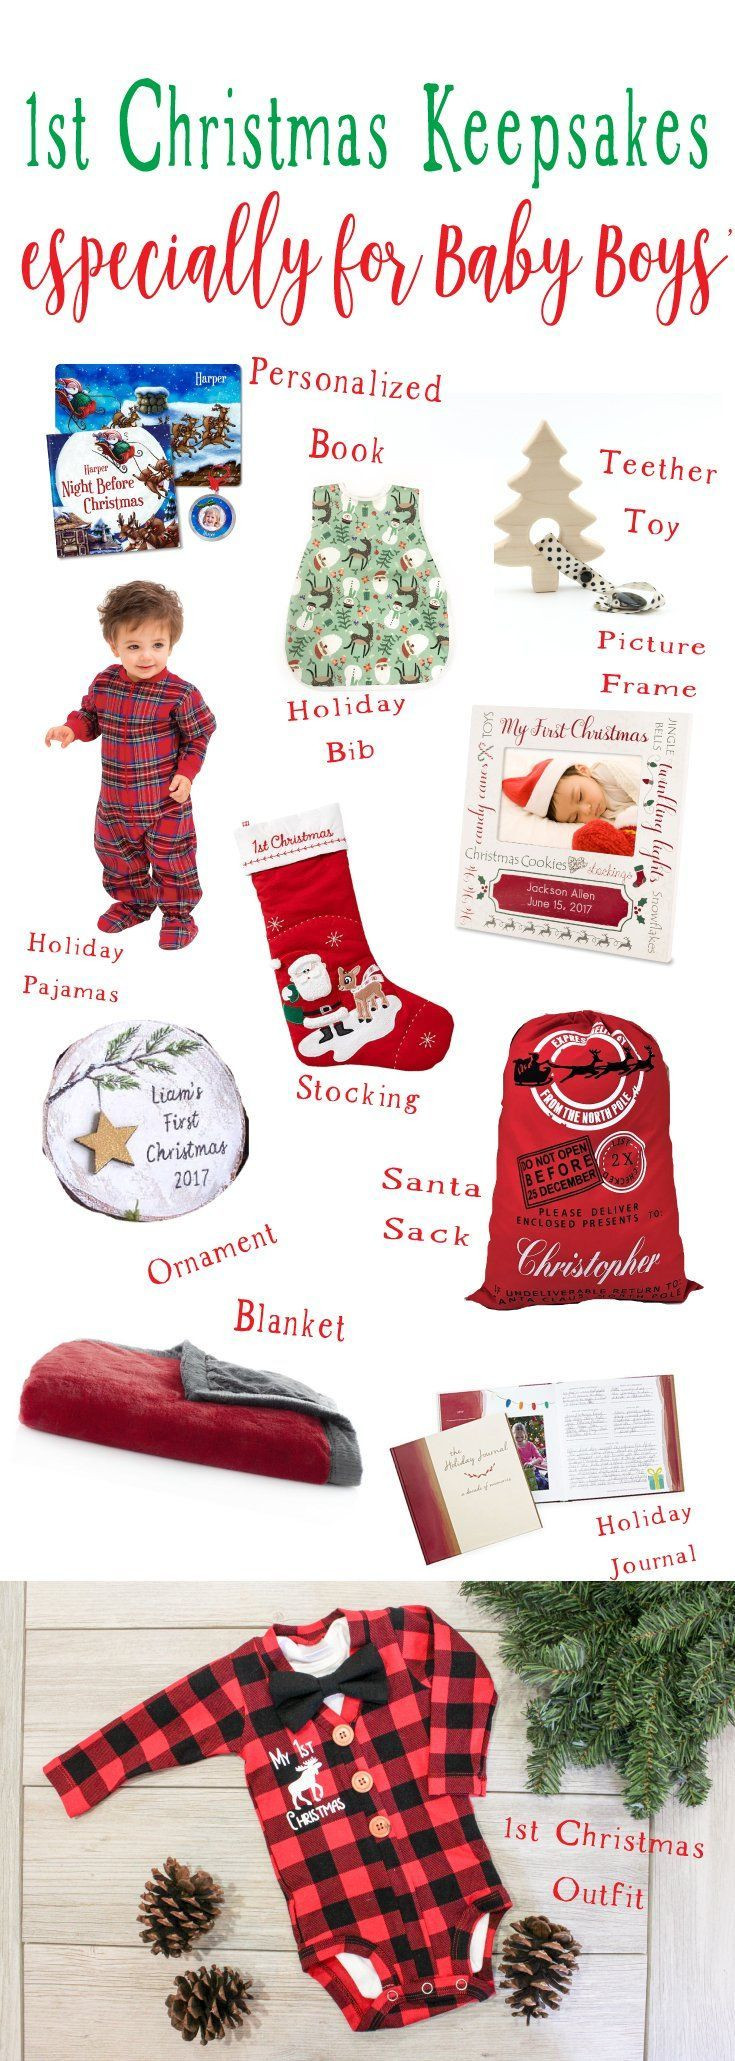 Baby'S First Christmas Gift Ideas
 Baby Boy 1st Christmas Keepsake Ideas Christmas